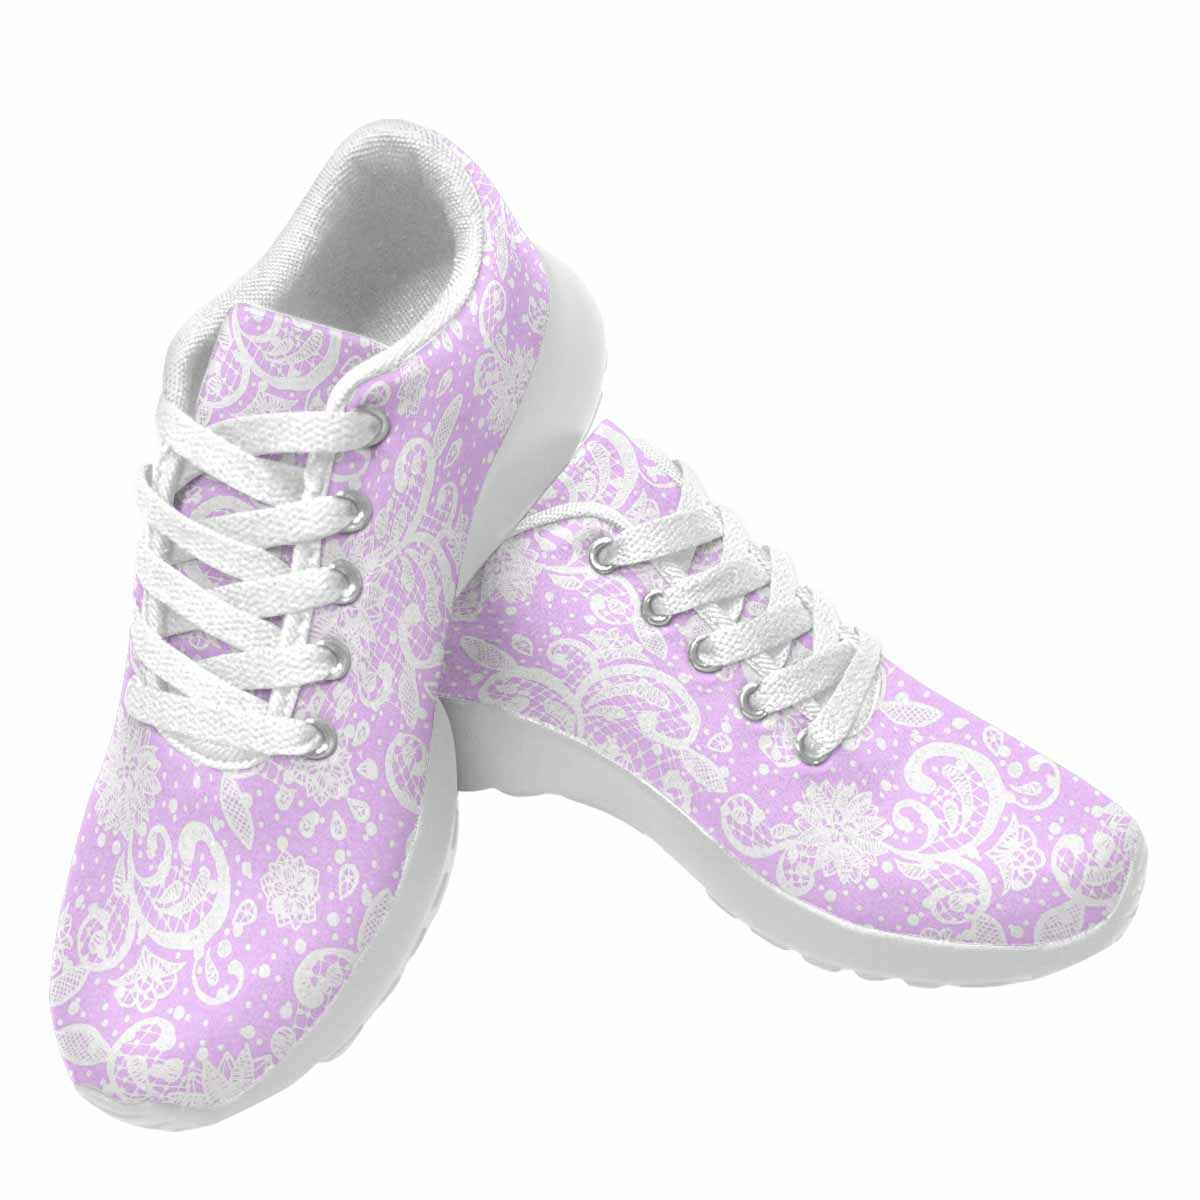 Victorian lace print, womens cute casual or running sneakers, design 06